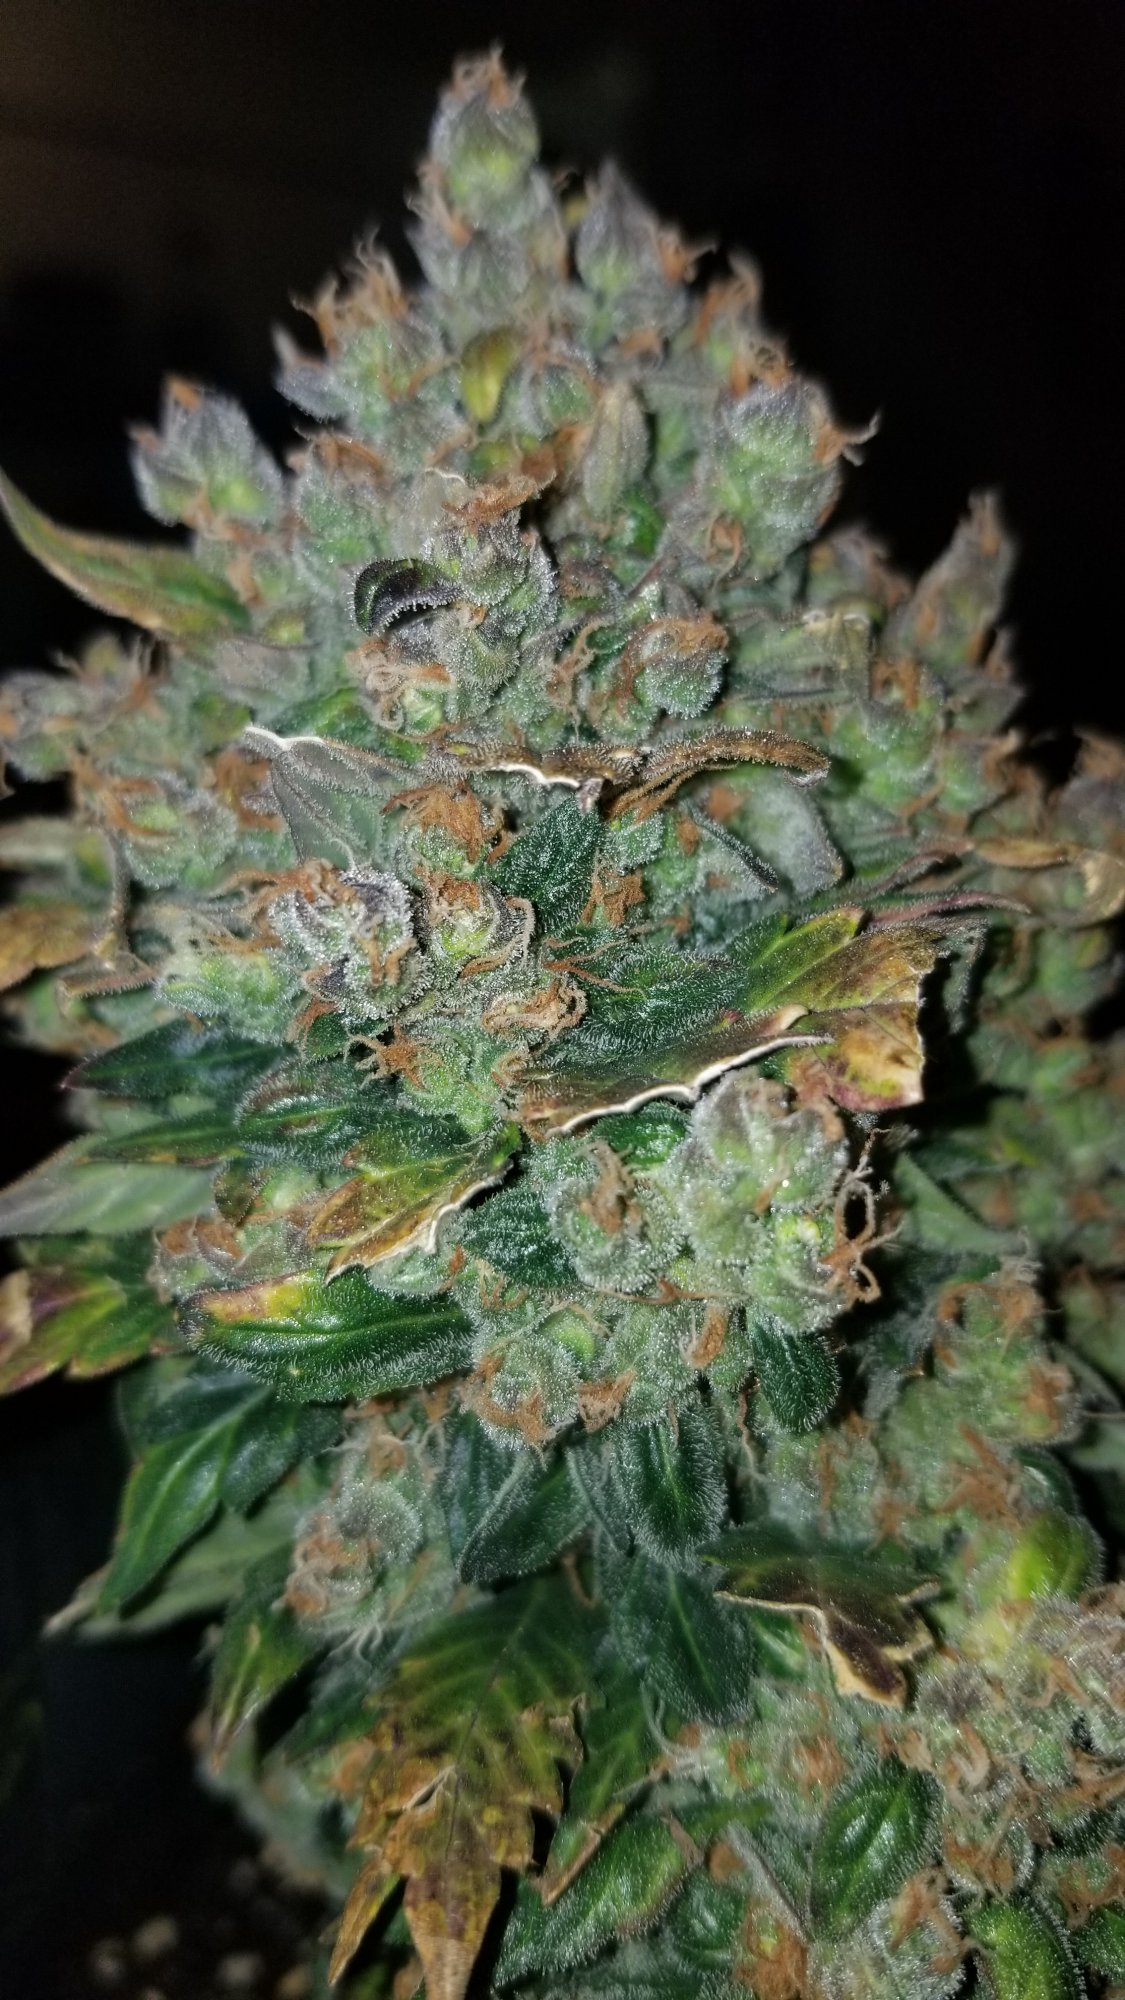 Few pics from my current grow 9